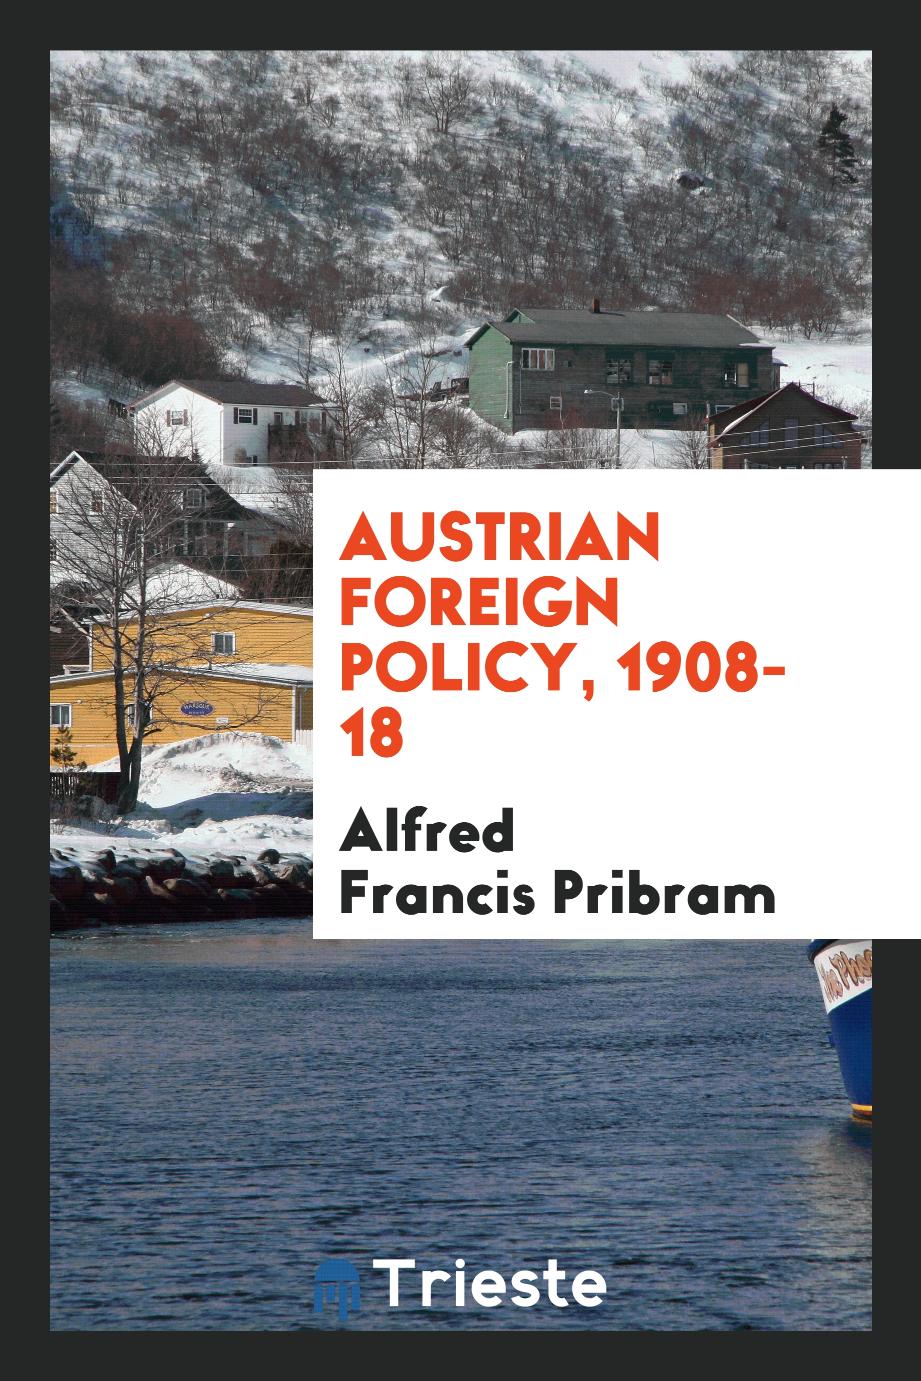 Austrian foreign policy, 1908-18